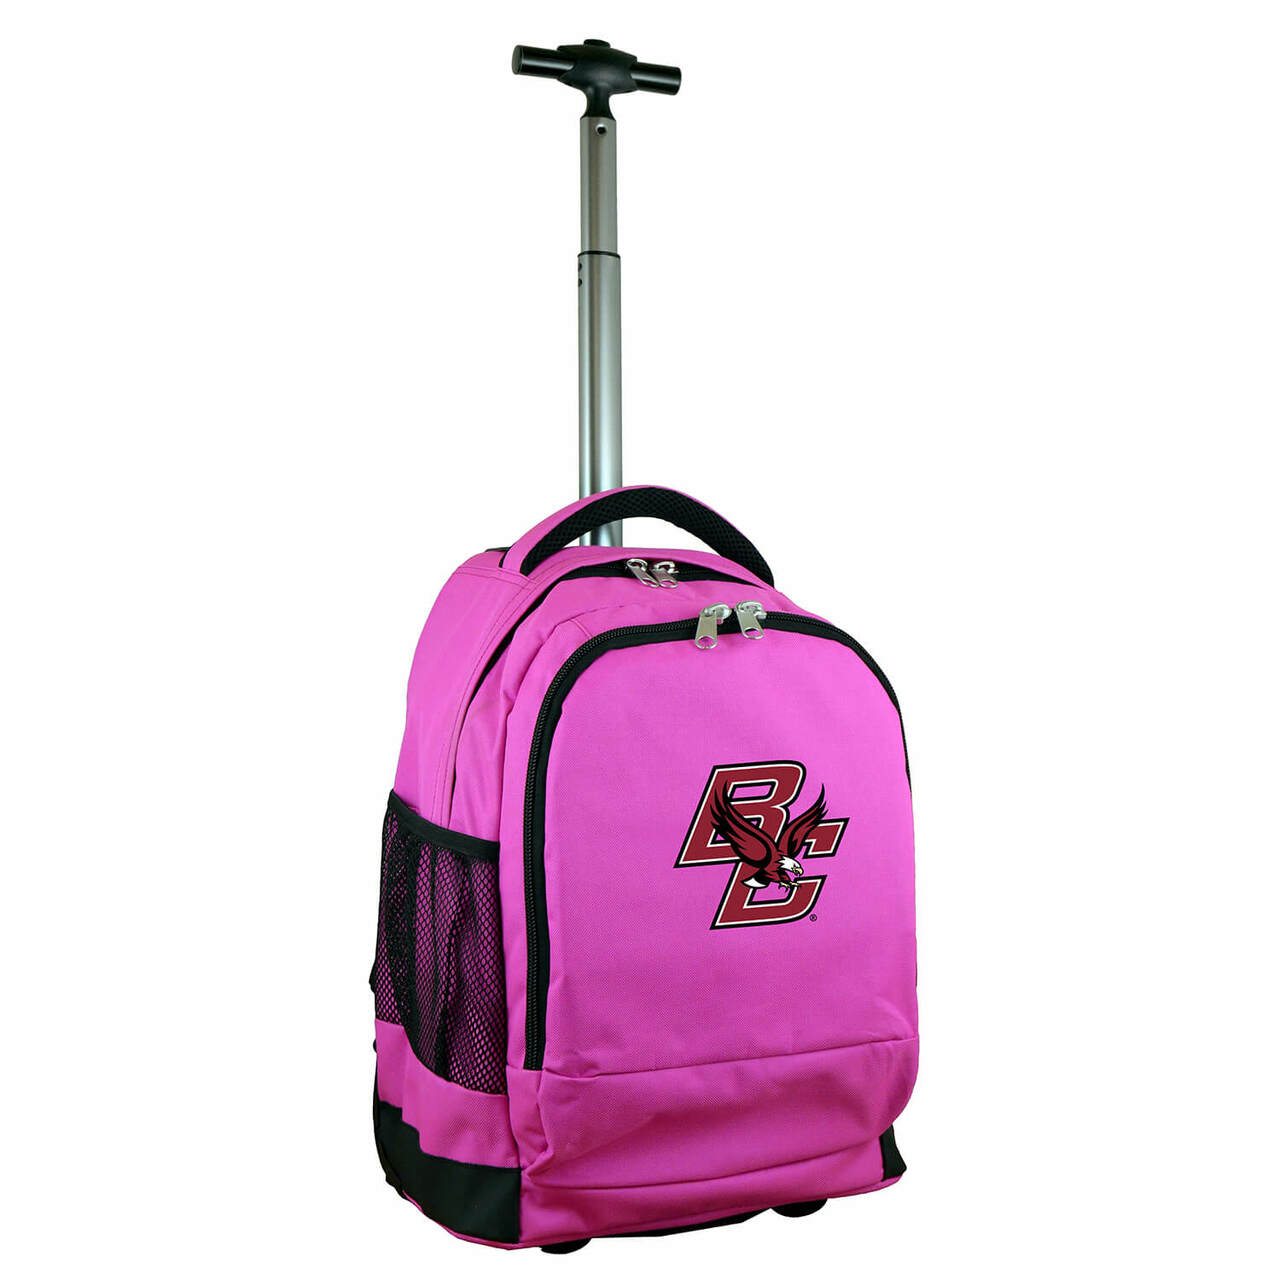 Boston College Premium Wheeled Backpack in Pink